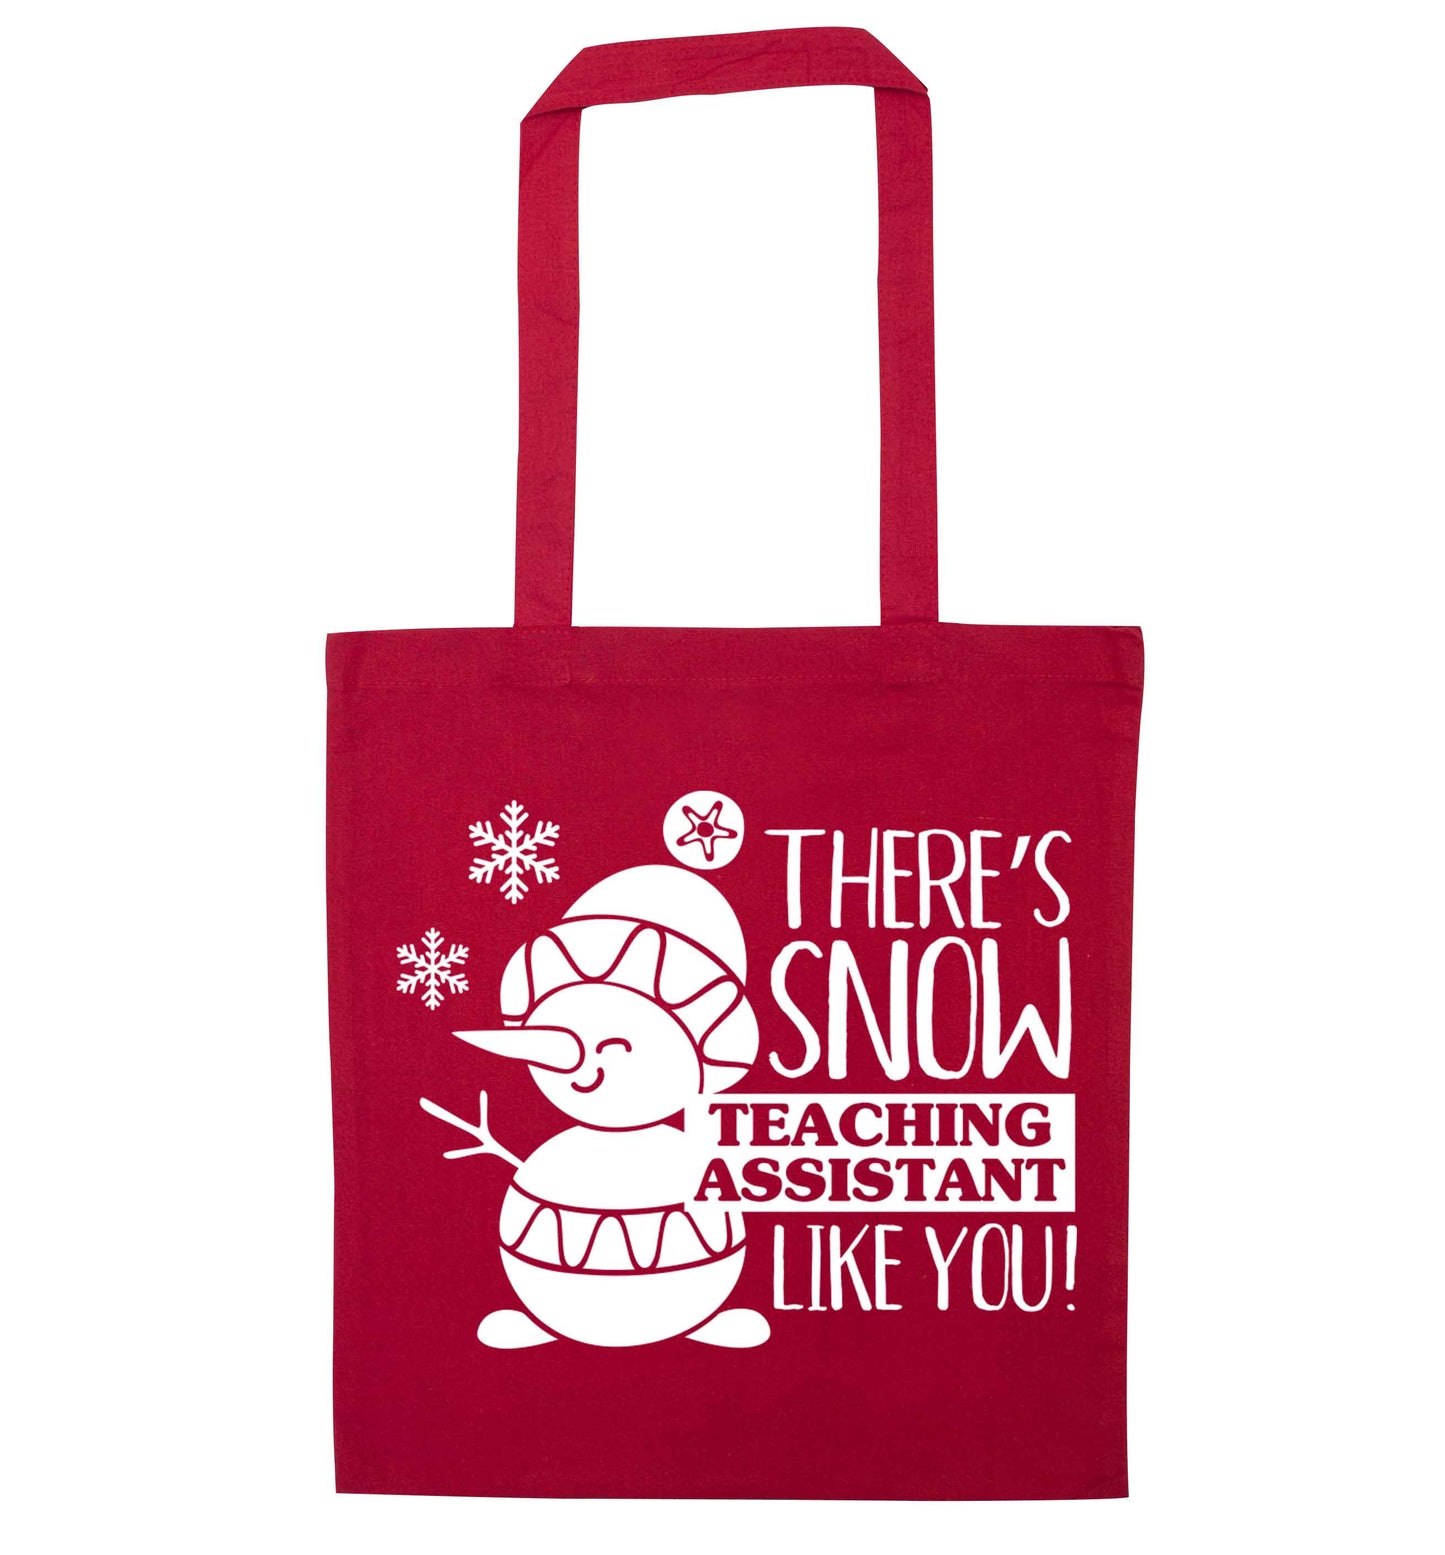 There's snow teaching assistant like you red tote bag